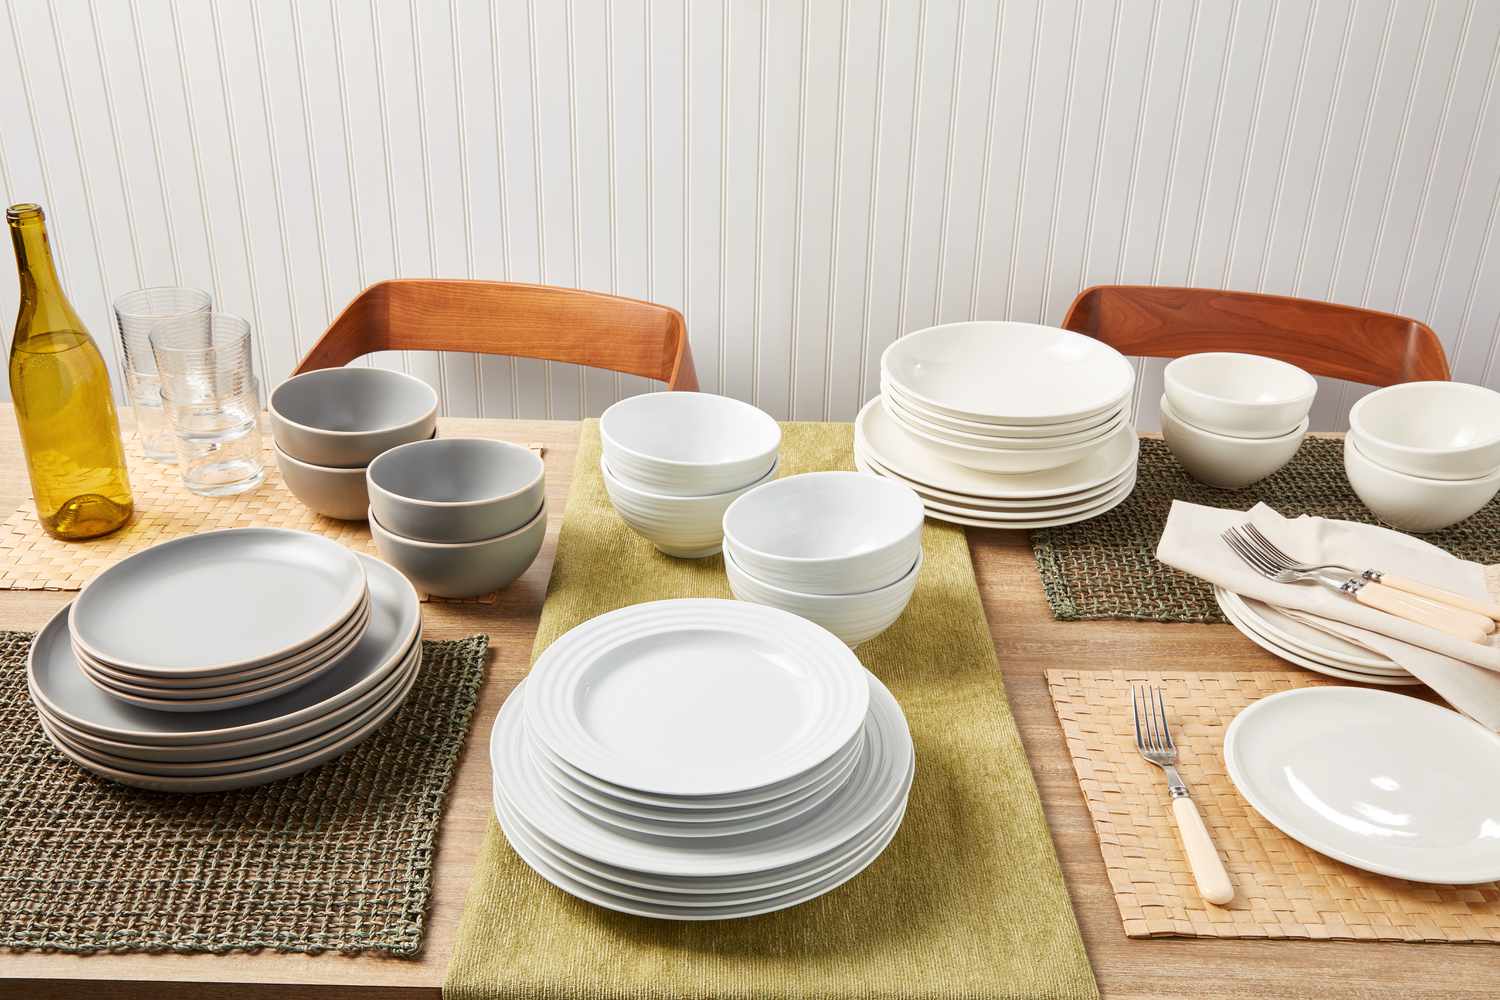 What Is The Best Tableware?